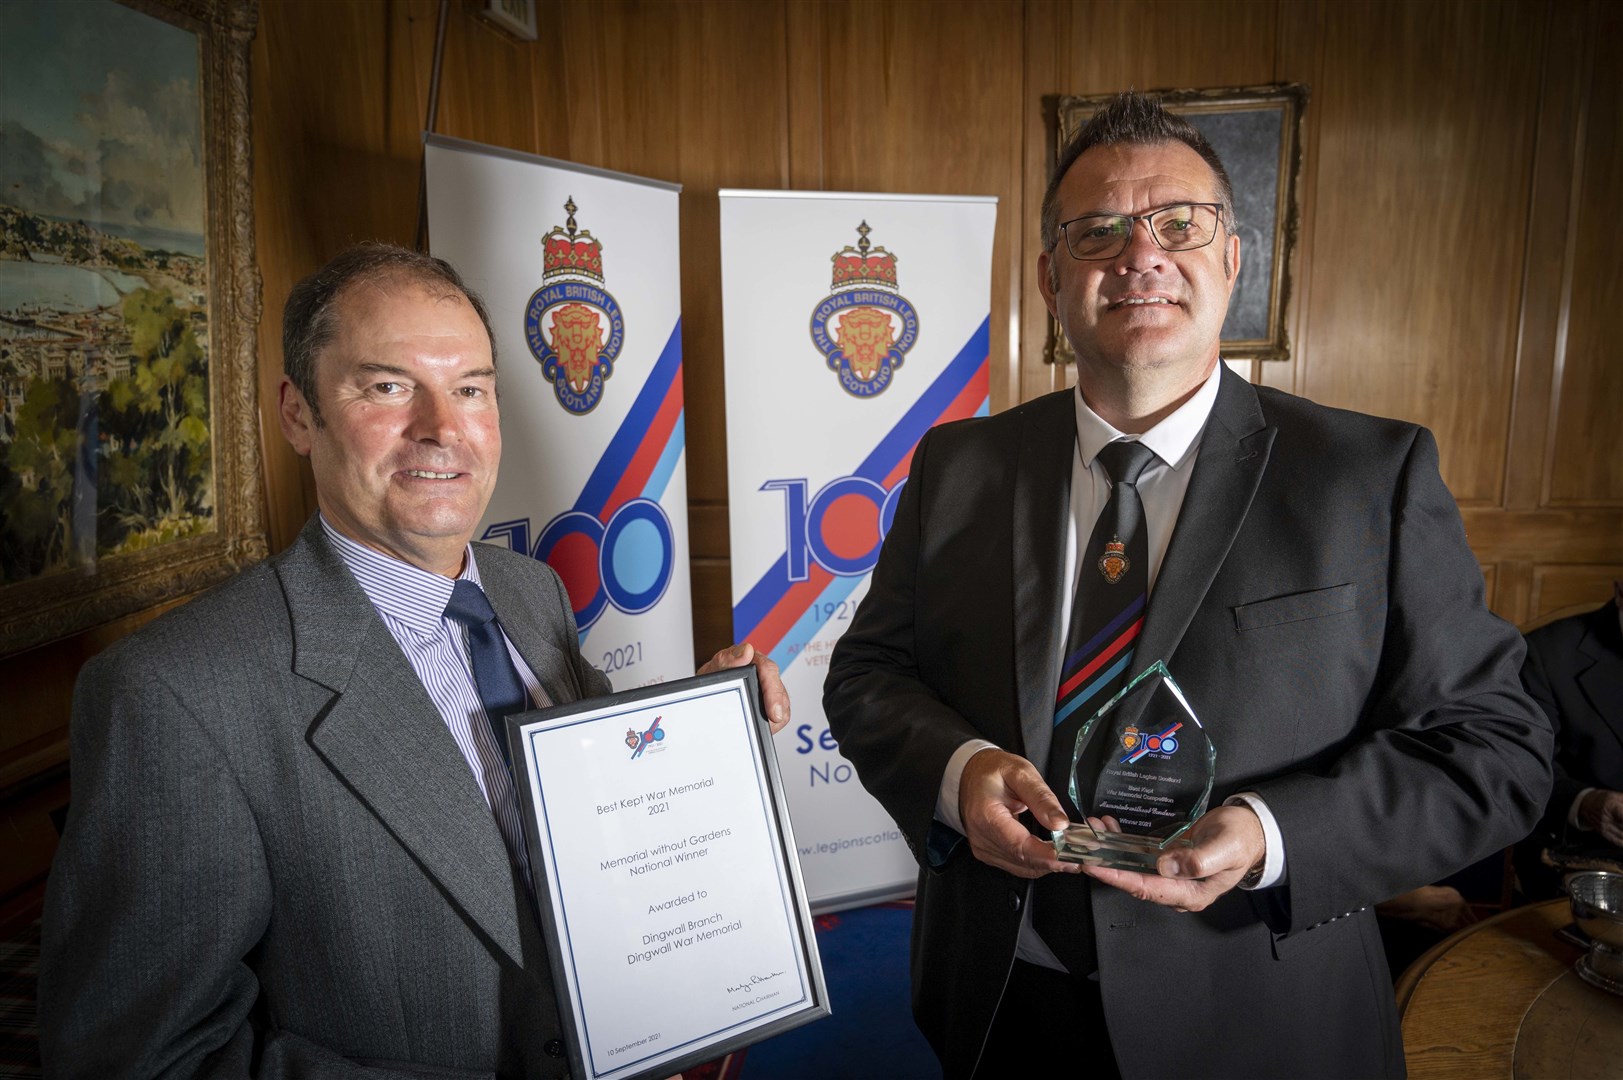 David Paton National Vice Chairman presented the award to David Hignett (Golspie winner) who accepted the award on behalf of the Dingwall winners who were not in attendance. Picture: Mark Owens & Legion Scotland.